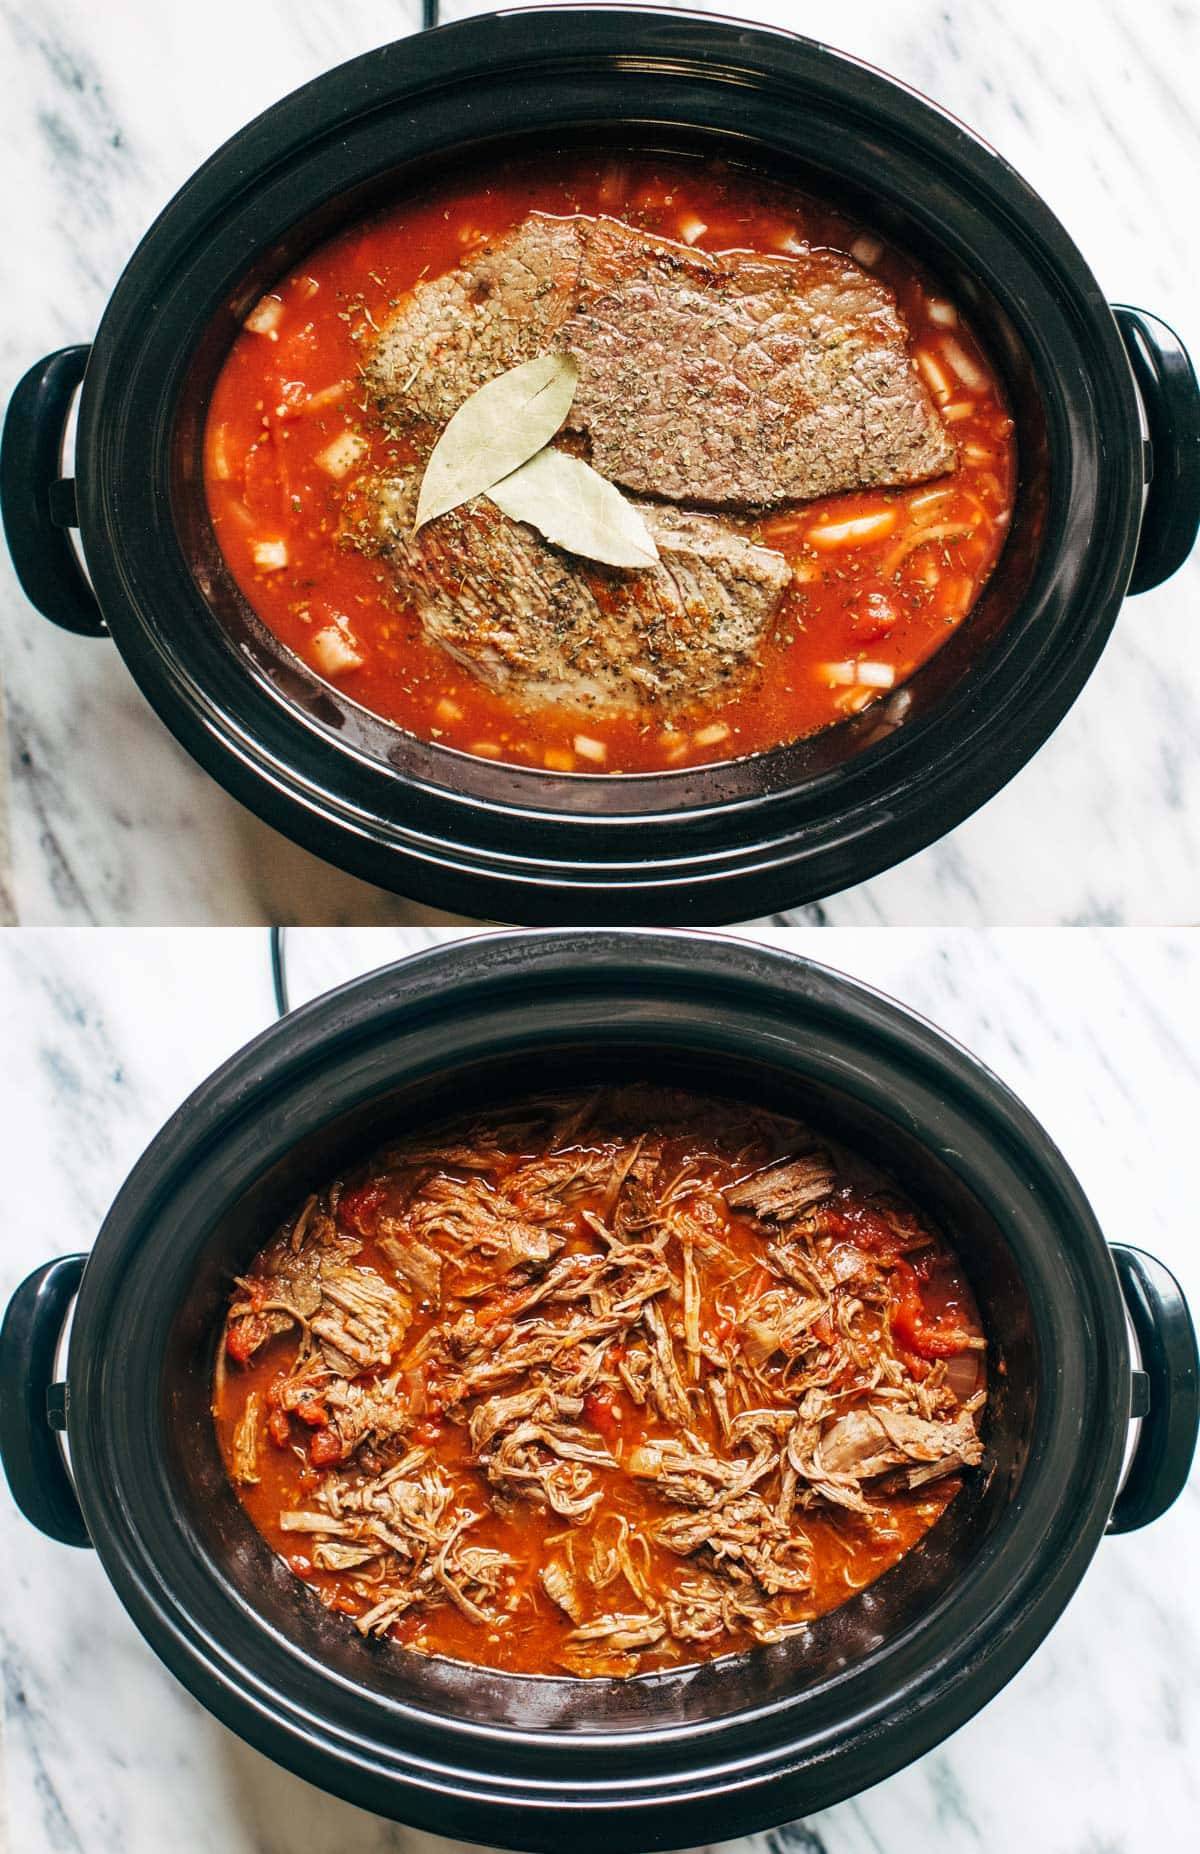 12 SUPER easy recipes you can make in a slow cooker, from veggie lasagna to an entire roasted chicken to pot roast! SO YUM! | pinchofyum.com